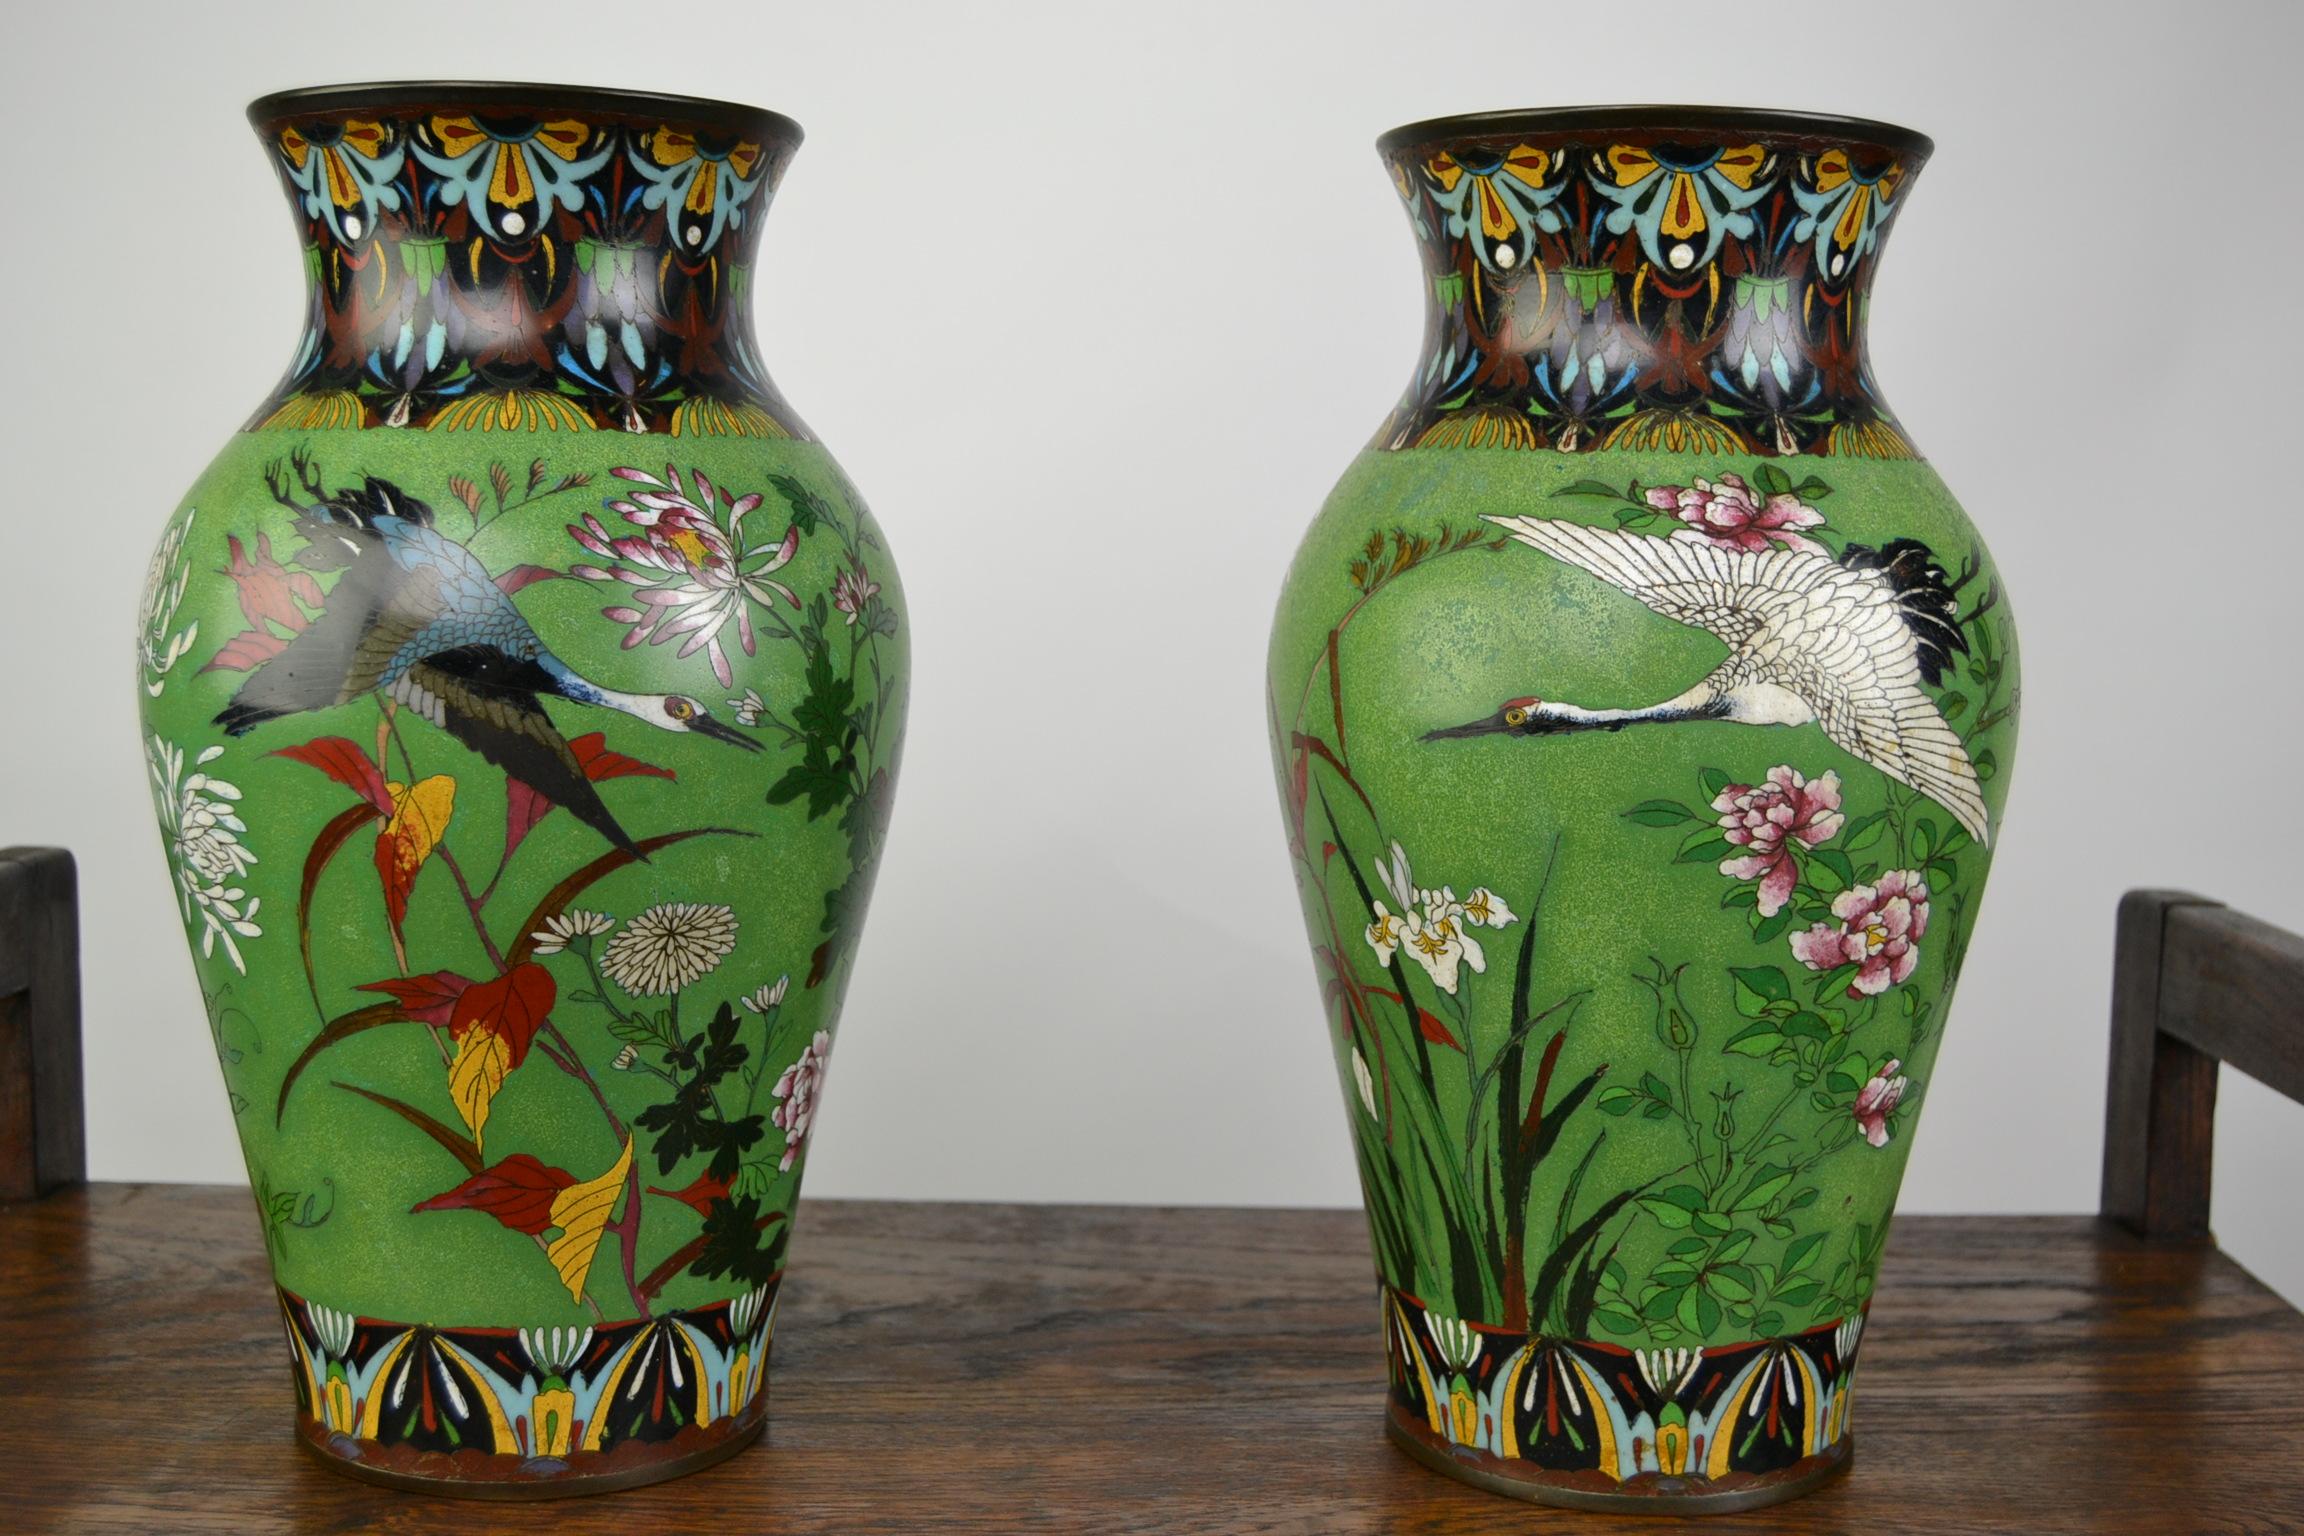 Pair of Japanese Cloisonne Enamel on Copper Vases with Crane Birds and Flowers  4